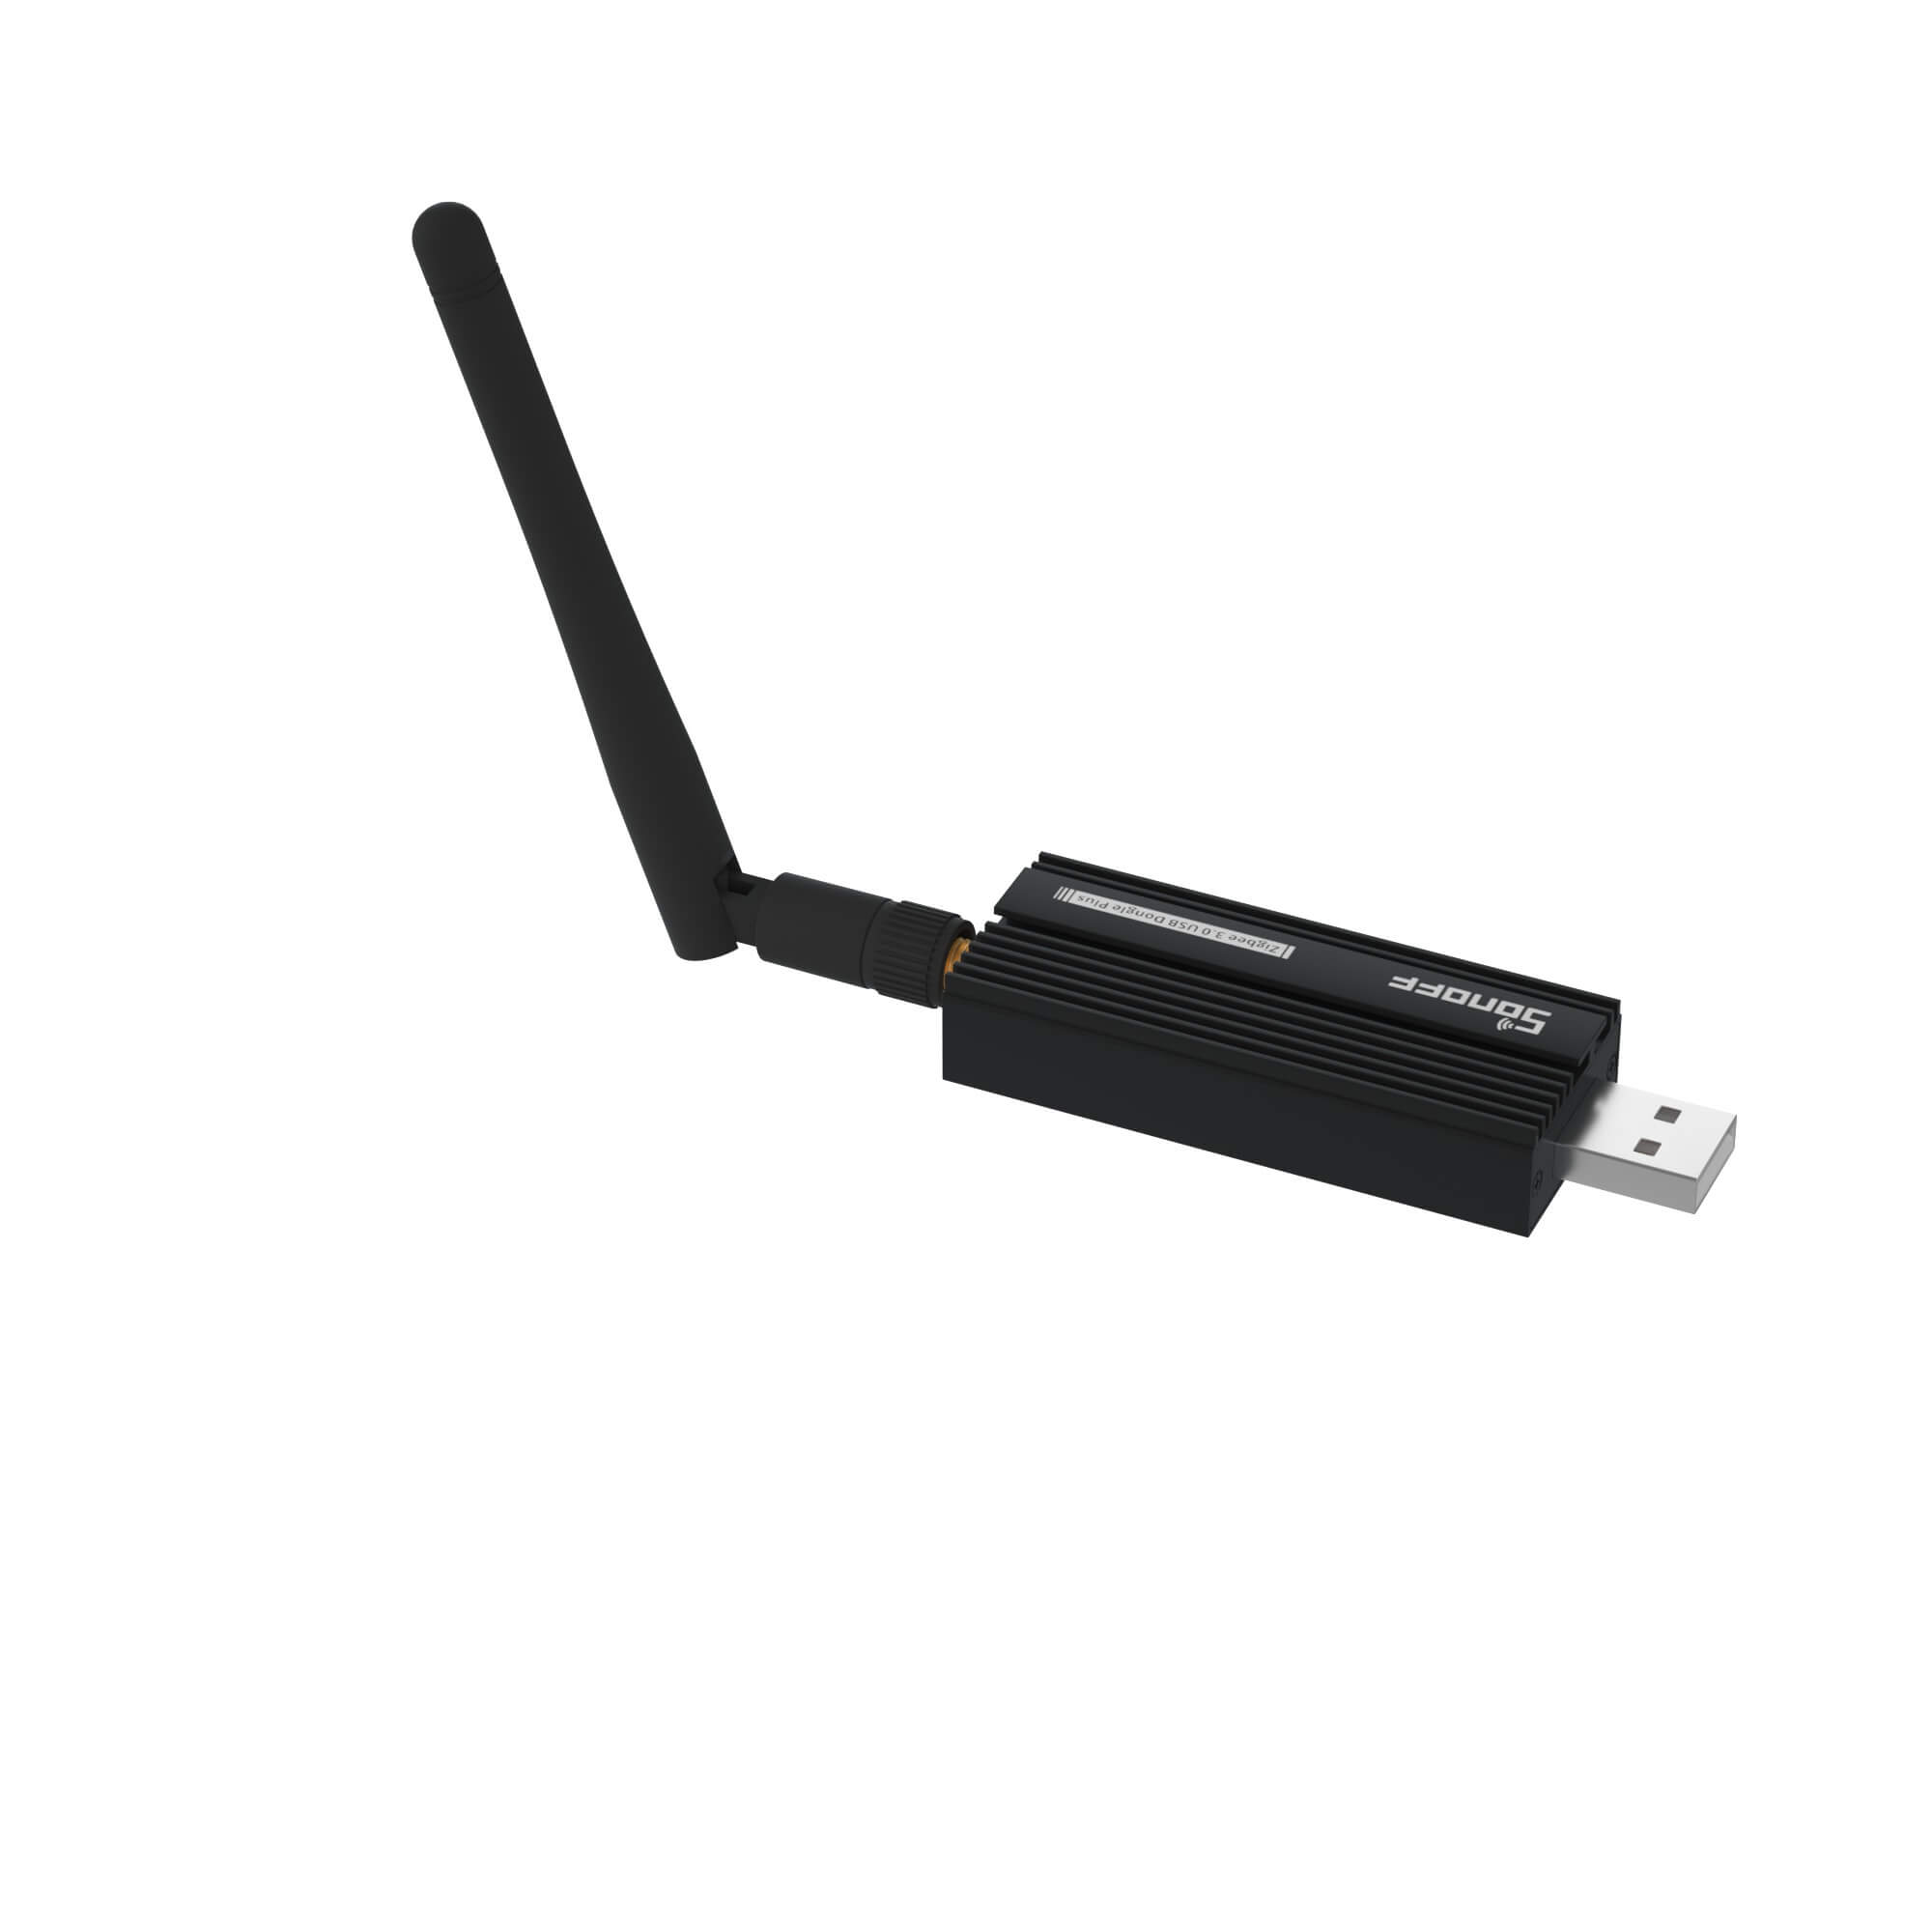 Replace Various Zigbee Hubs with One Dongle – SONOFF Zigbee 3.0 USB Dongle  Plus - SONOFF Official